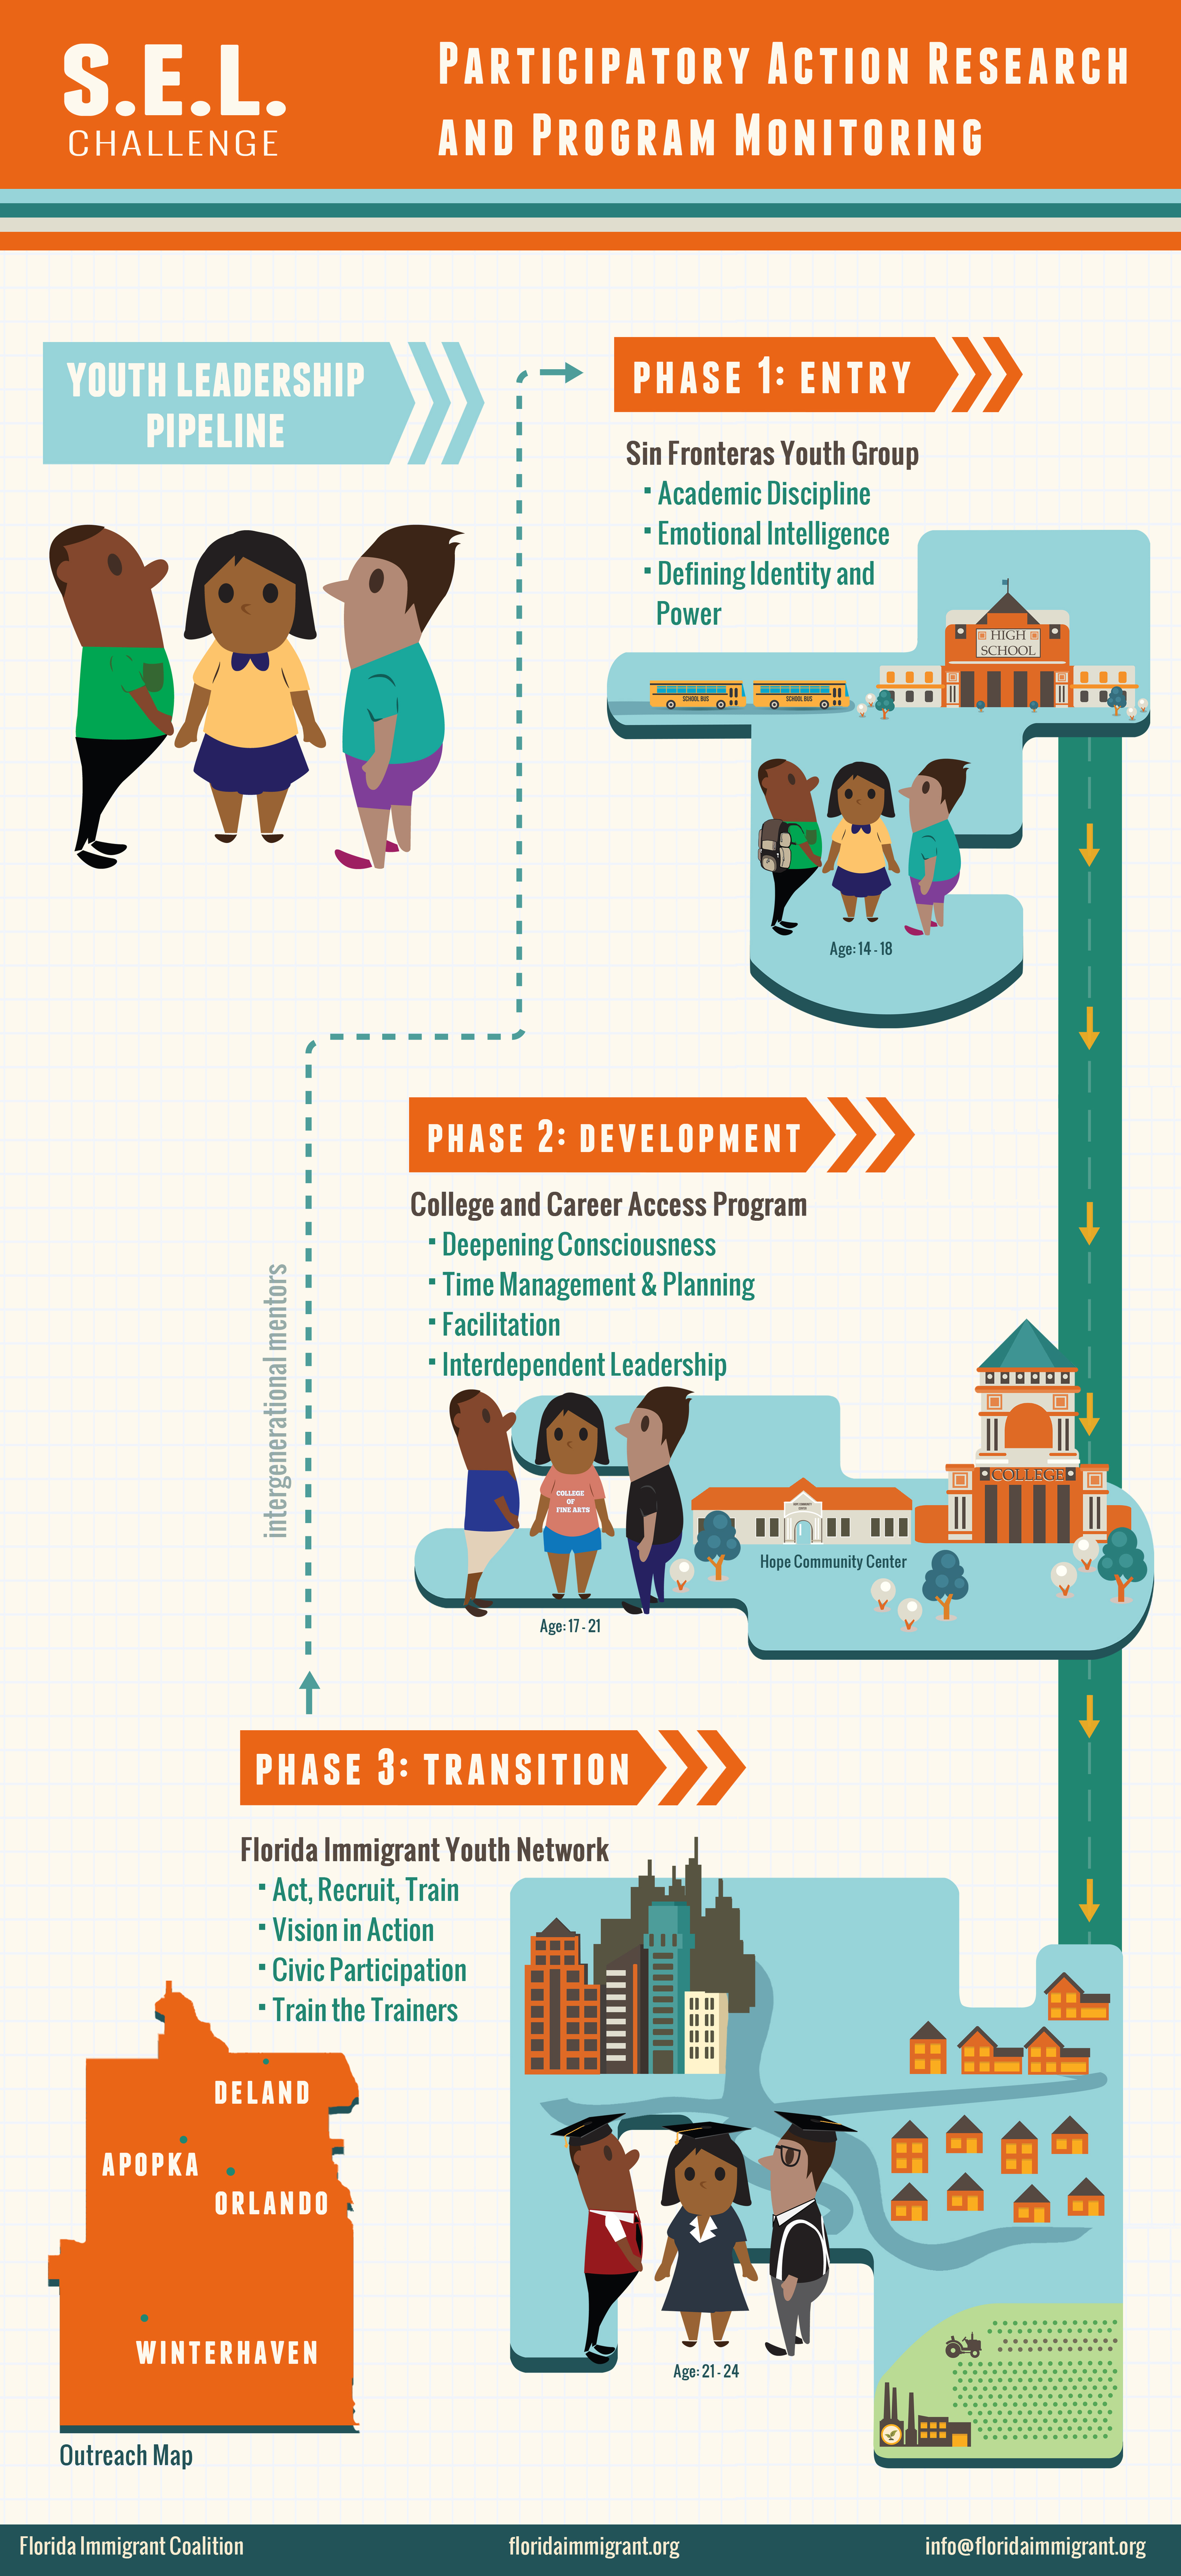  Client: Florida Immigrant Coalition  Type: Infographic 